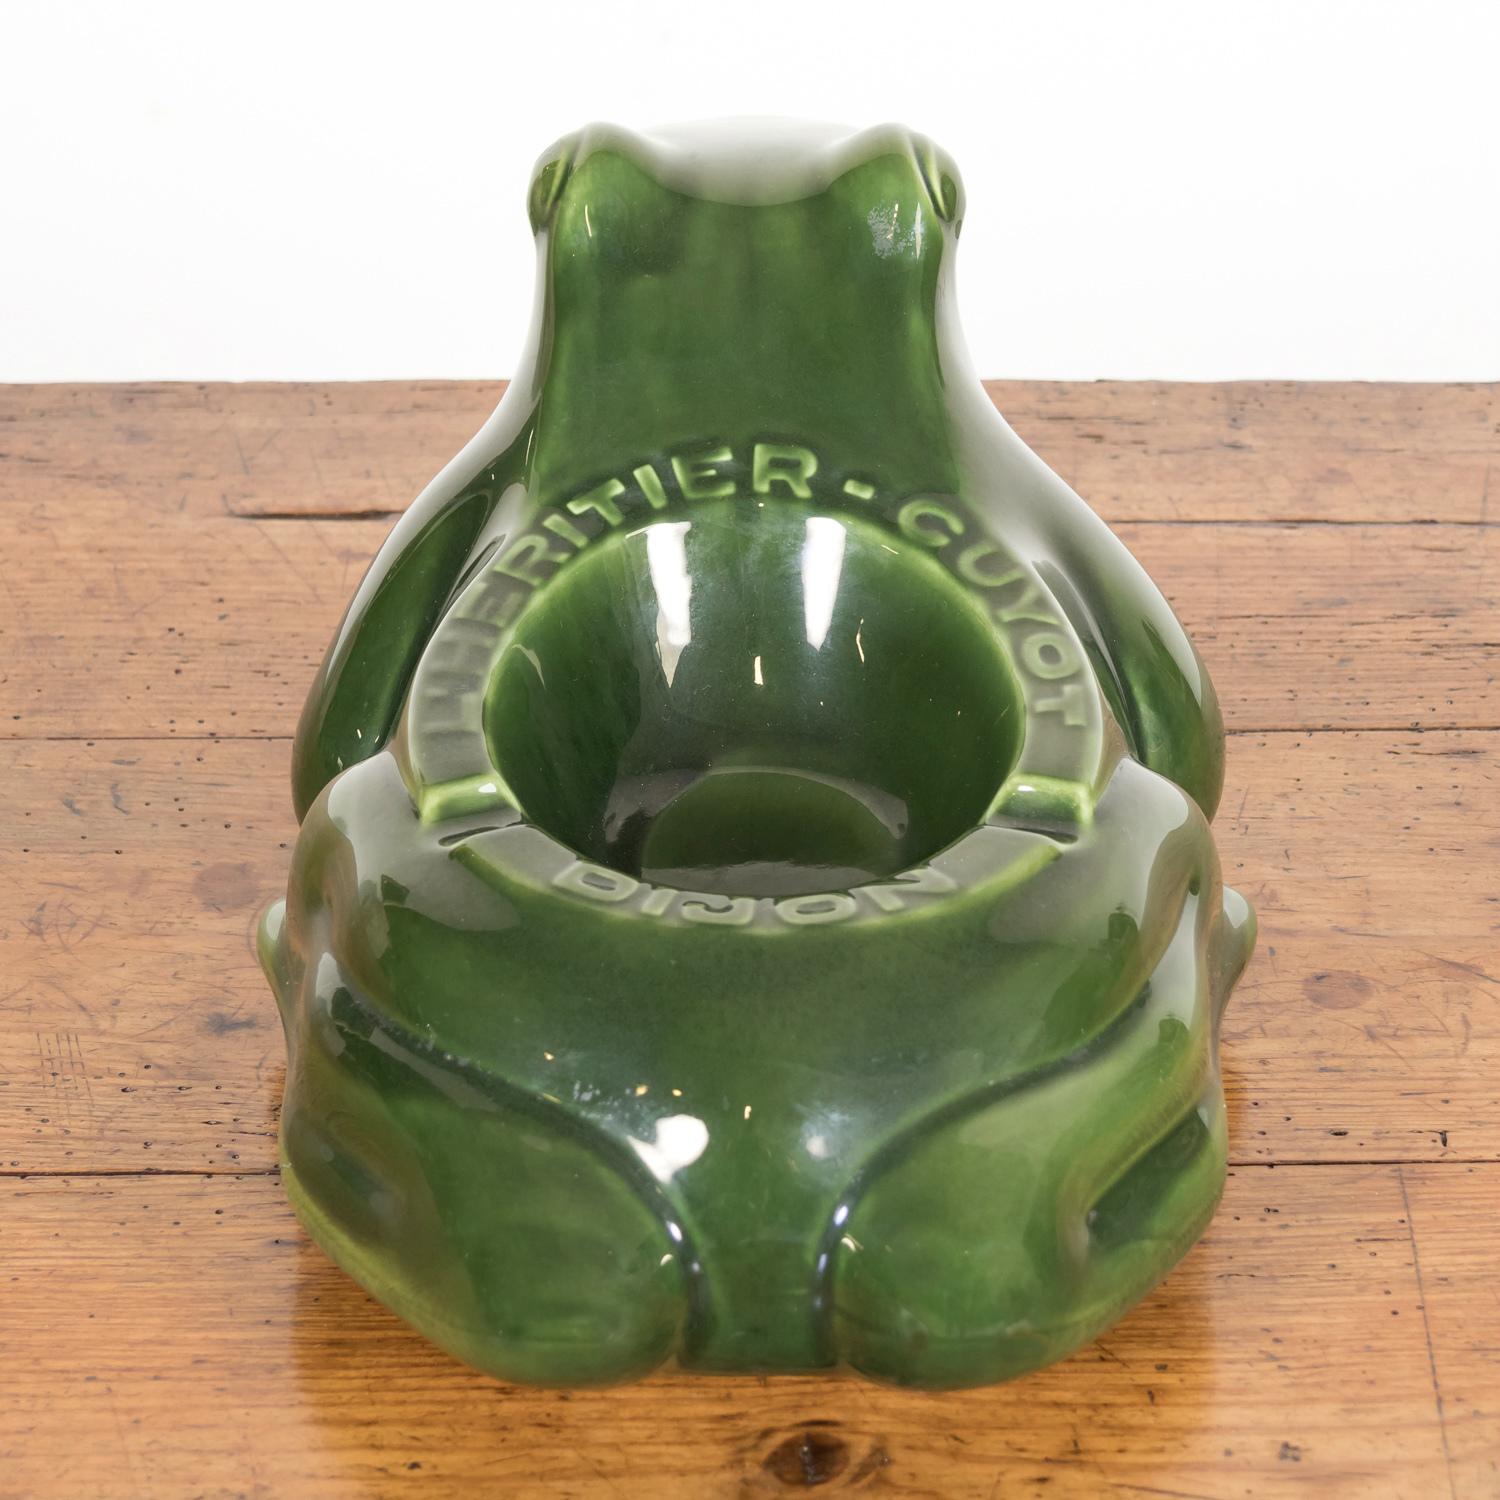 Large Vintage French L'HERITIER GUYOT DIJON Green Ceramic Frog Ad Ashtray For Sale 4